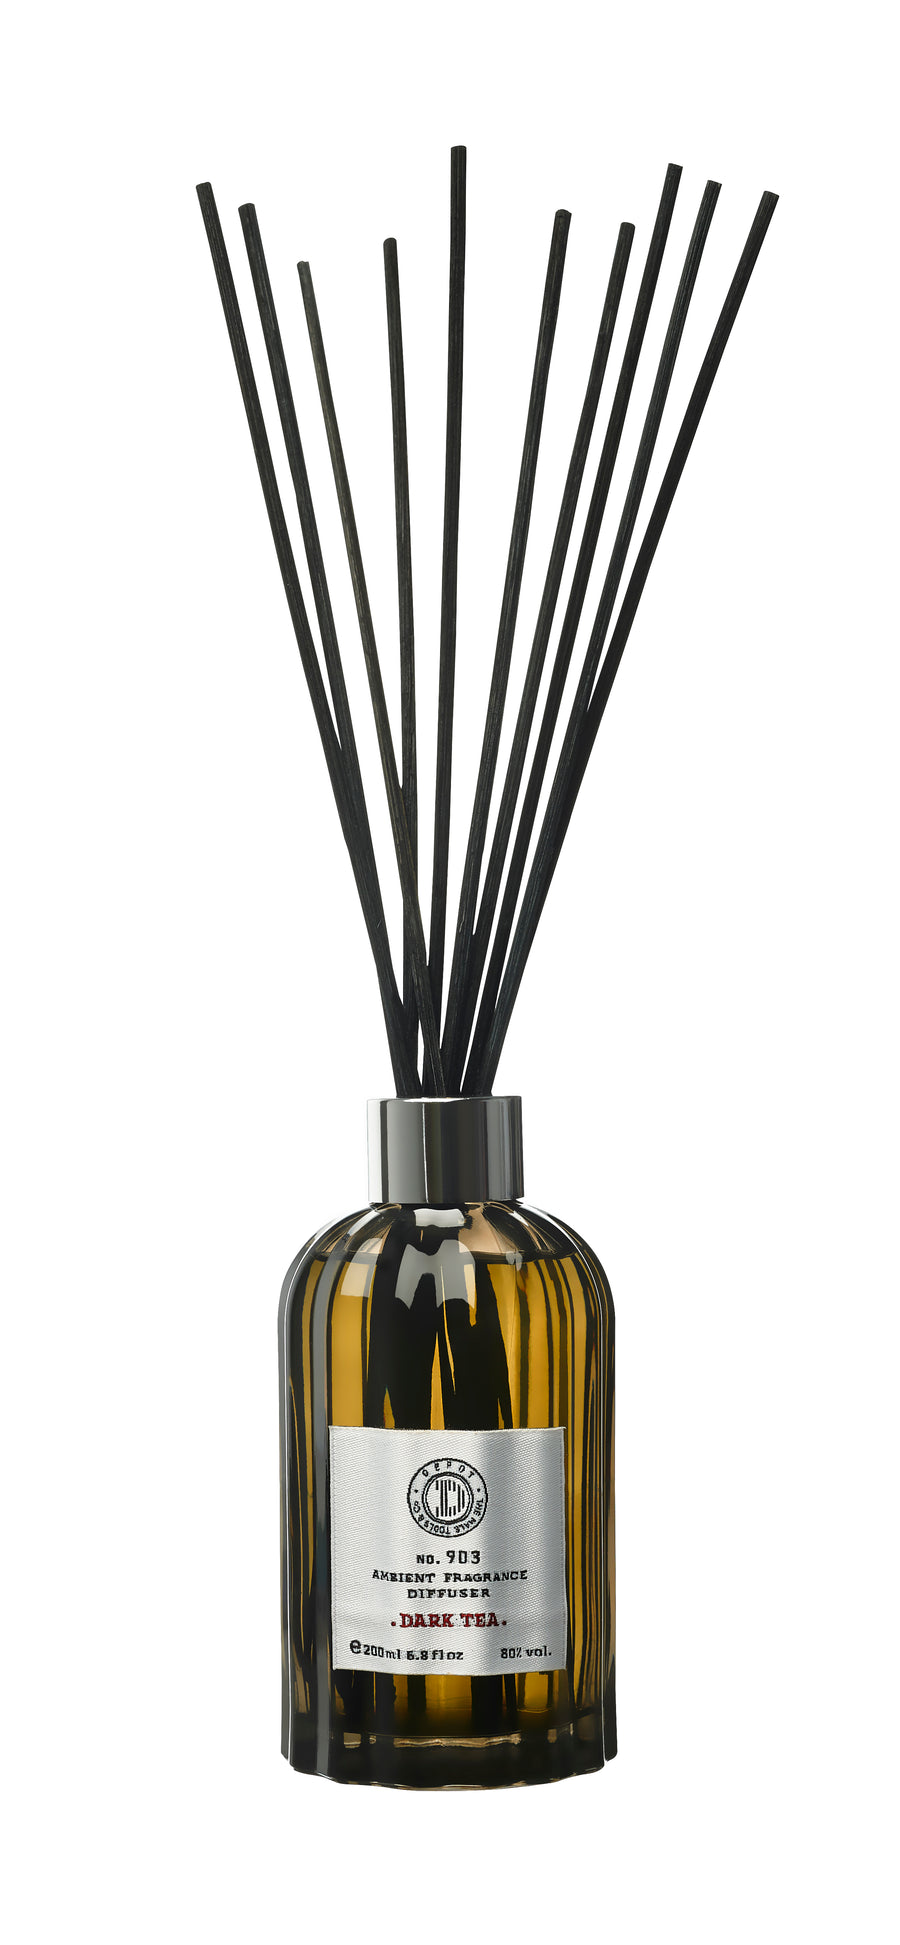 No. 903 Ambient Fragrance Diffuser | Long-Lasting & Aromatic